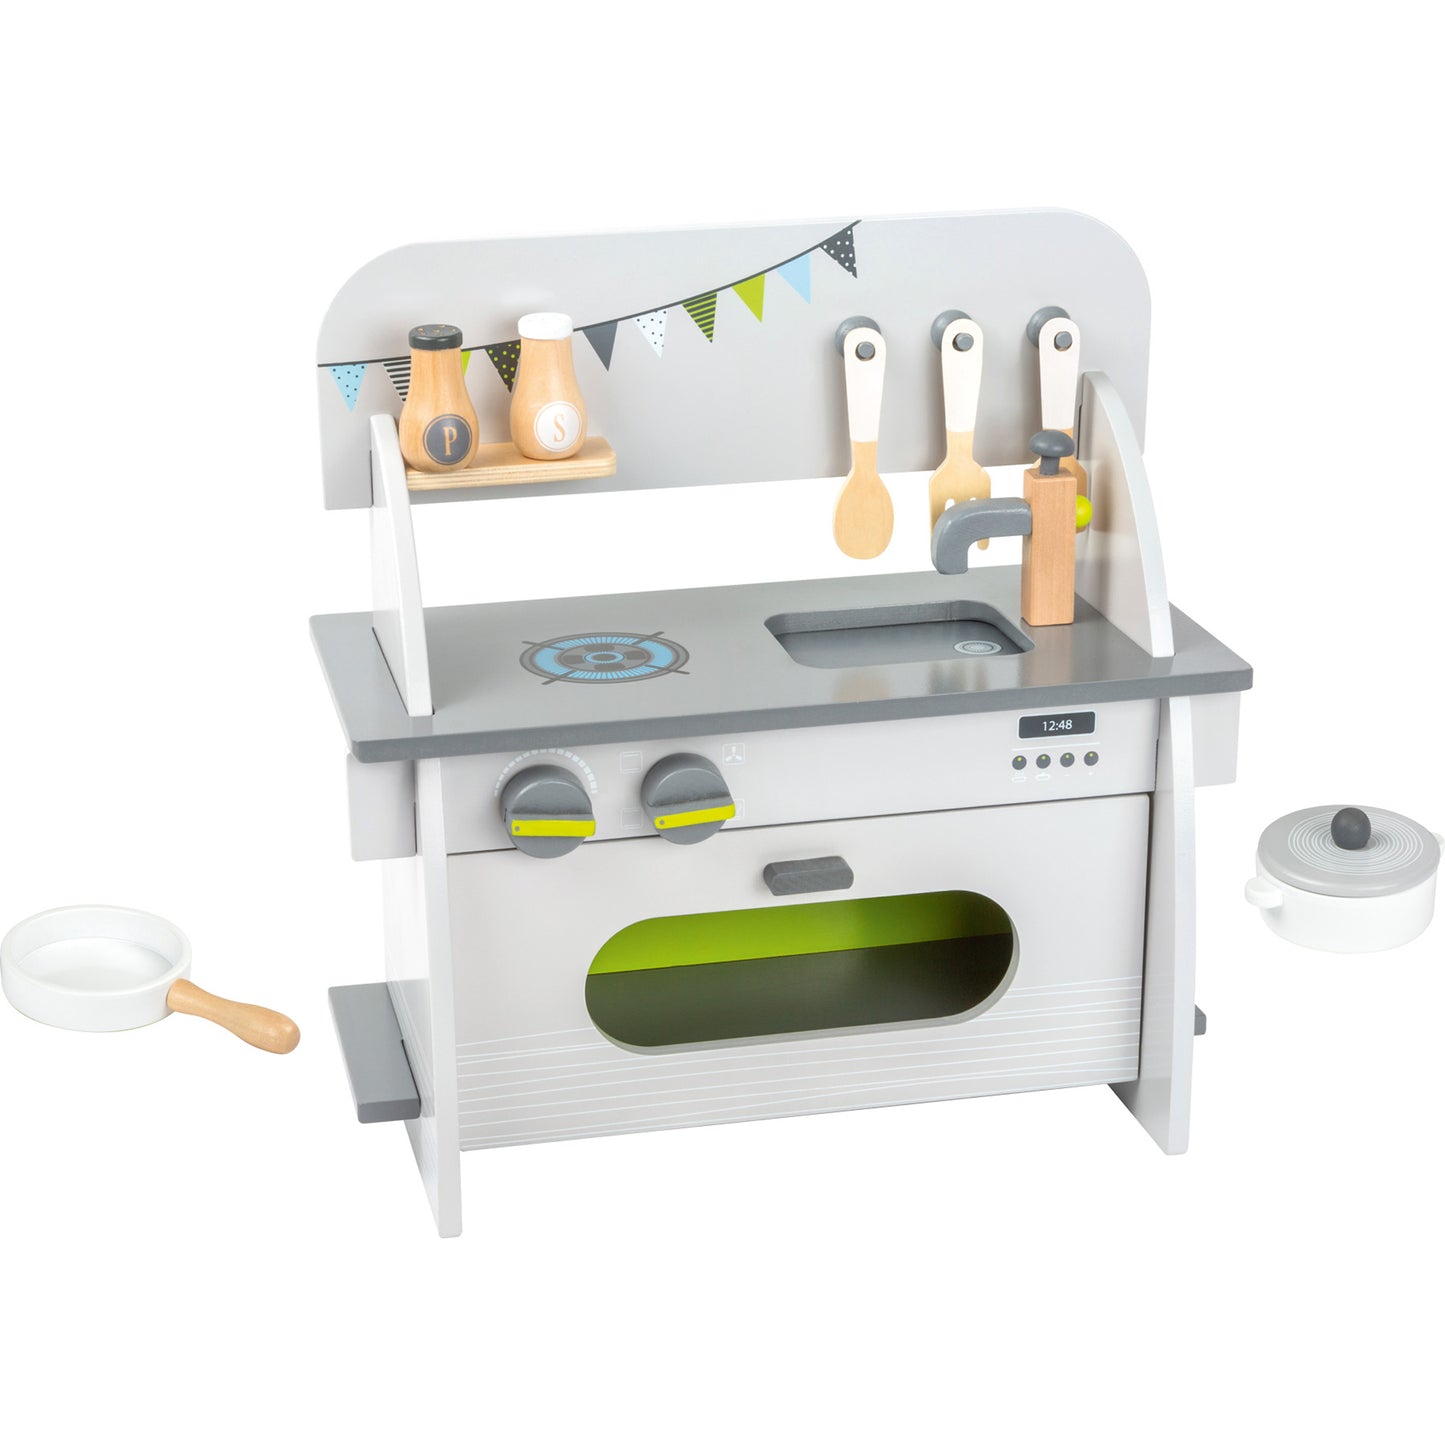 Compact Play Kitchen Playset